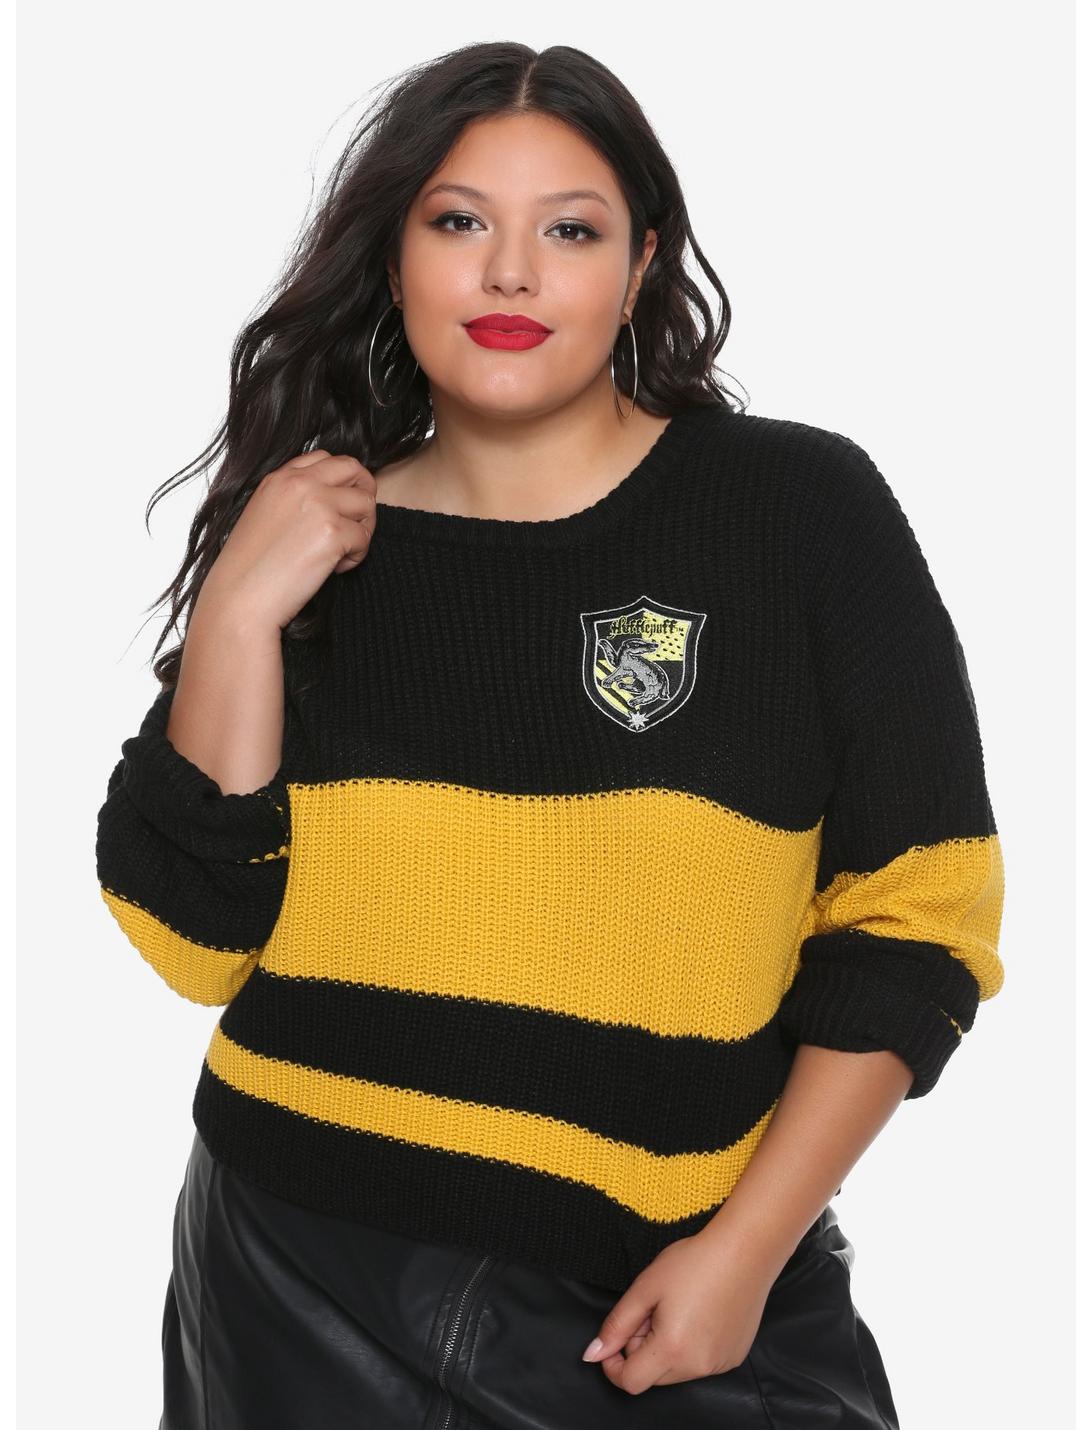 Harry Potter Hufflepuff Girls Quidditch Sweater Plus Size, BLACK, hi-res